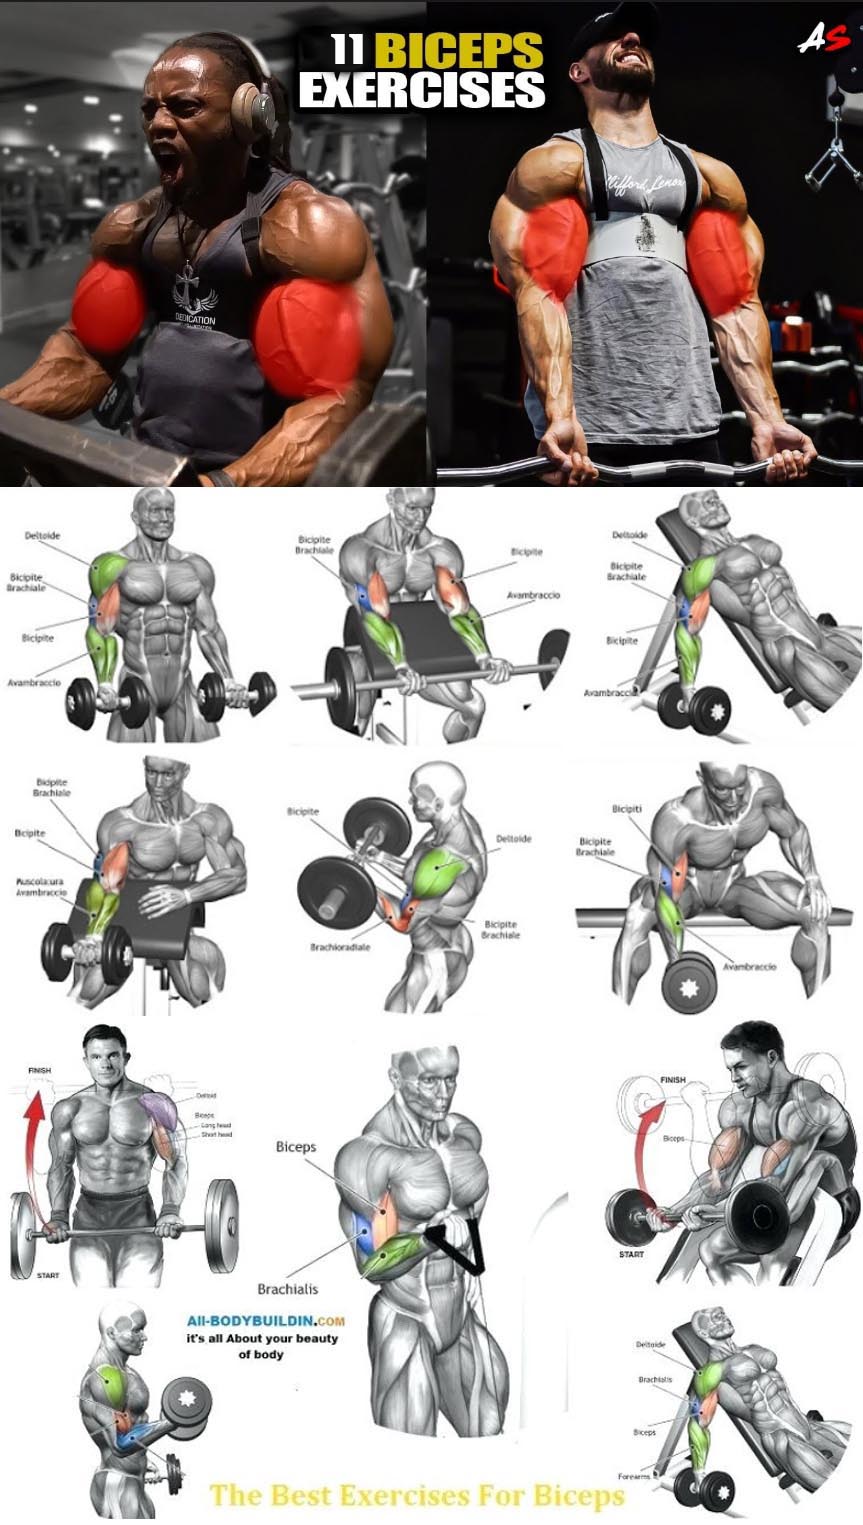 Biceps exercise